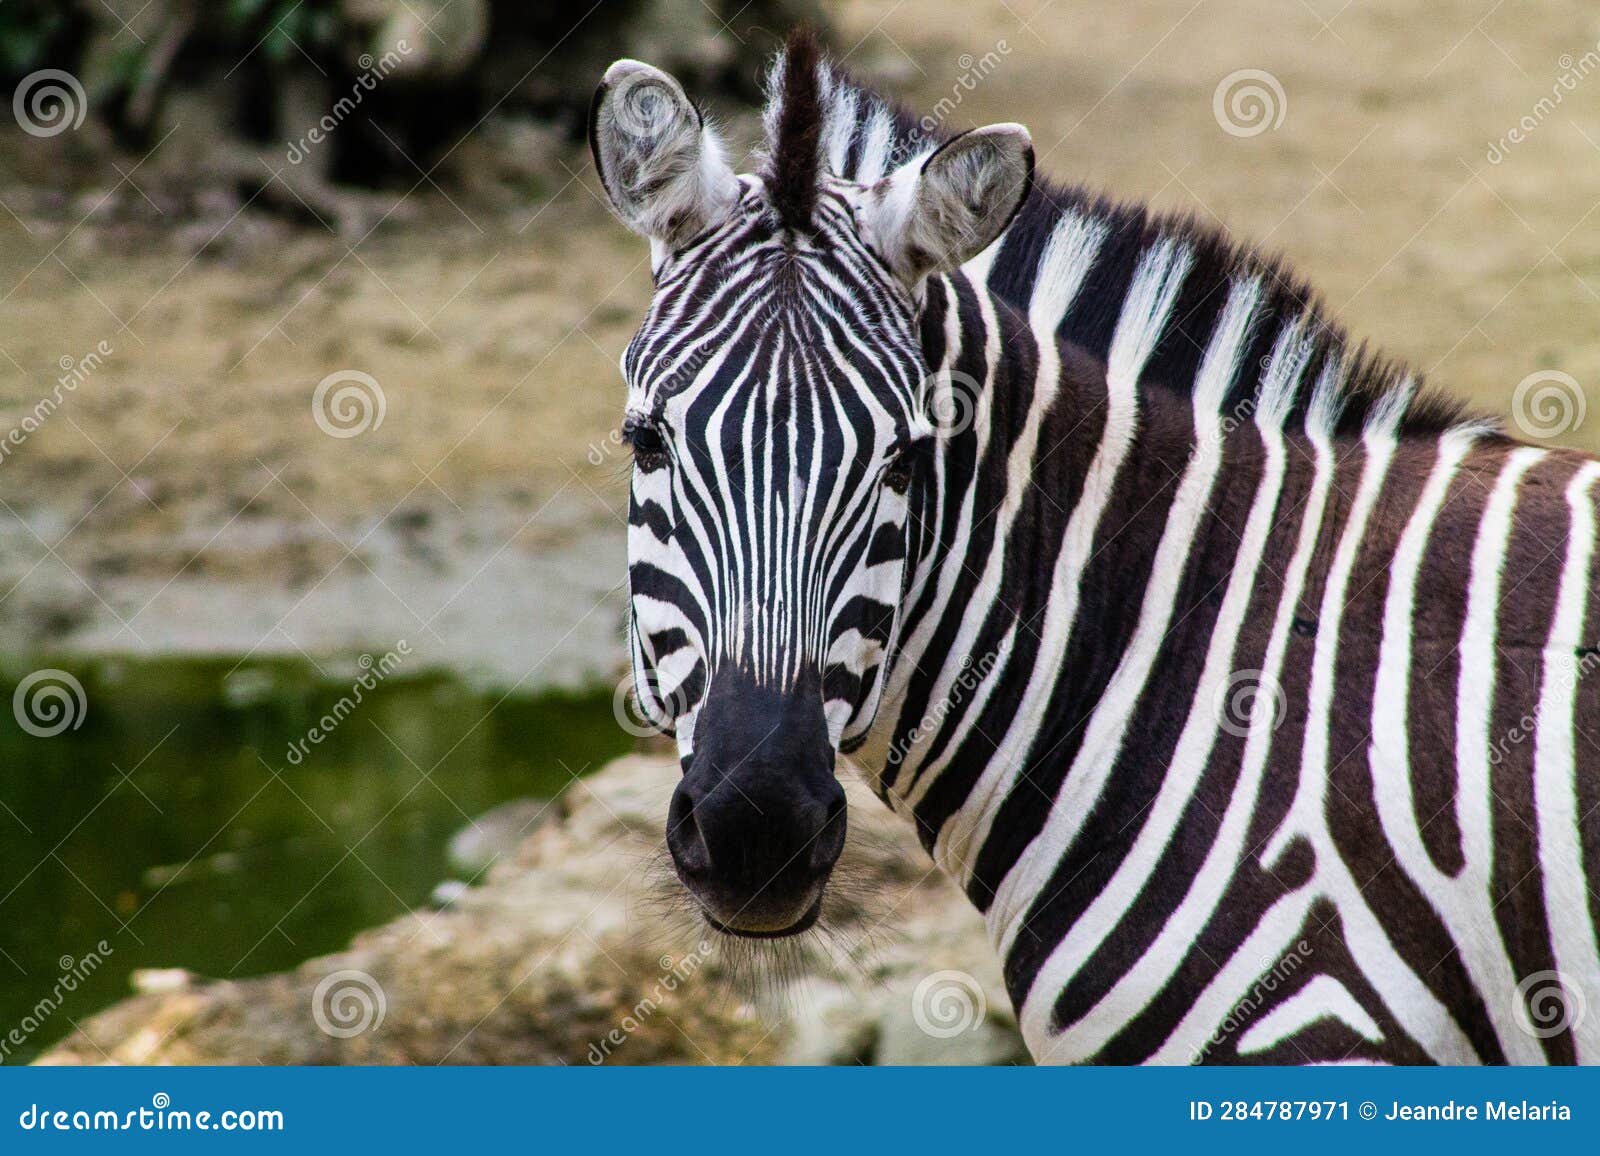 zebra in the zoo. the zebra is a member of the family equidae